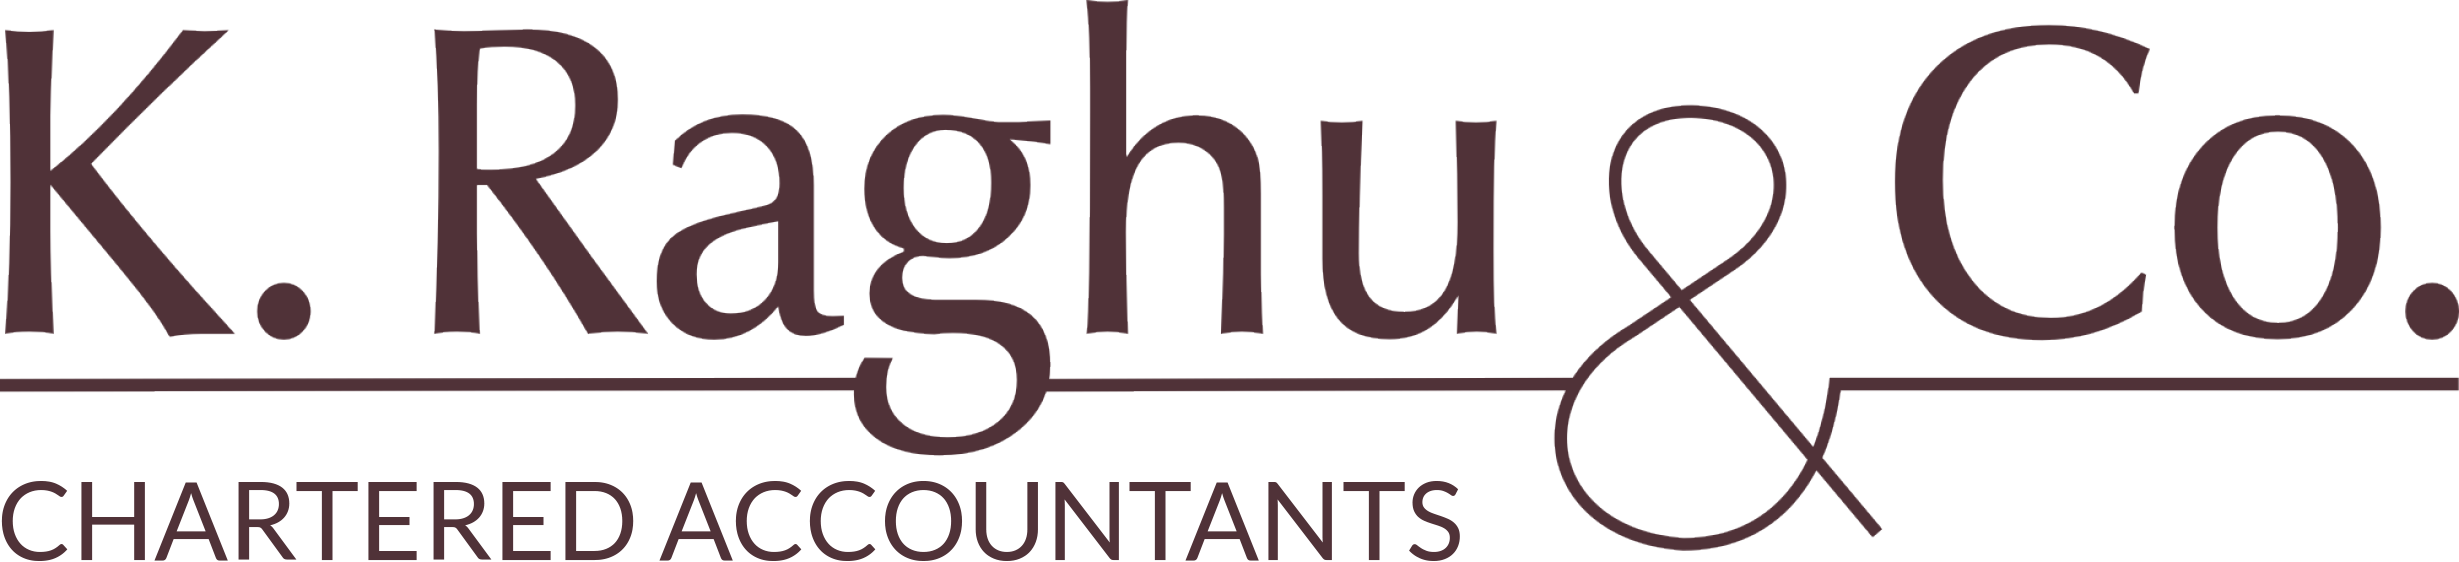 K. Raghu & Co - Chartered Accountants|Legal Services|Professional Services